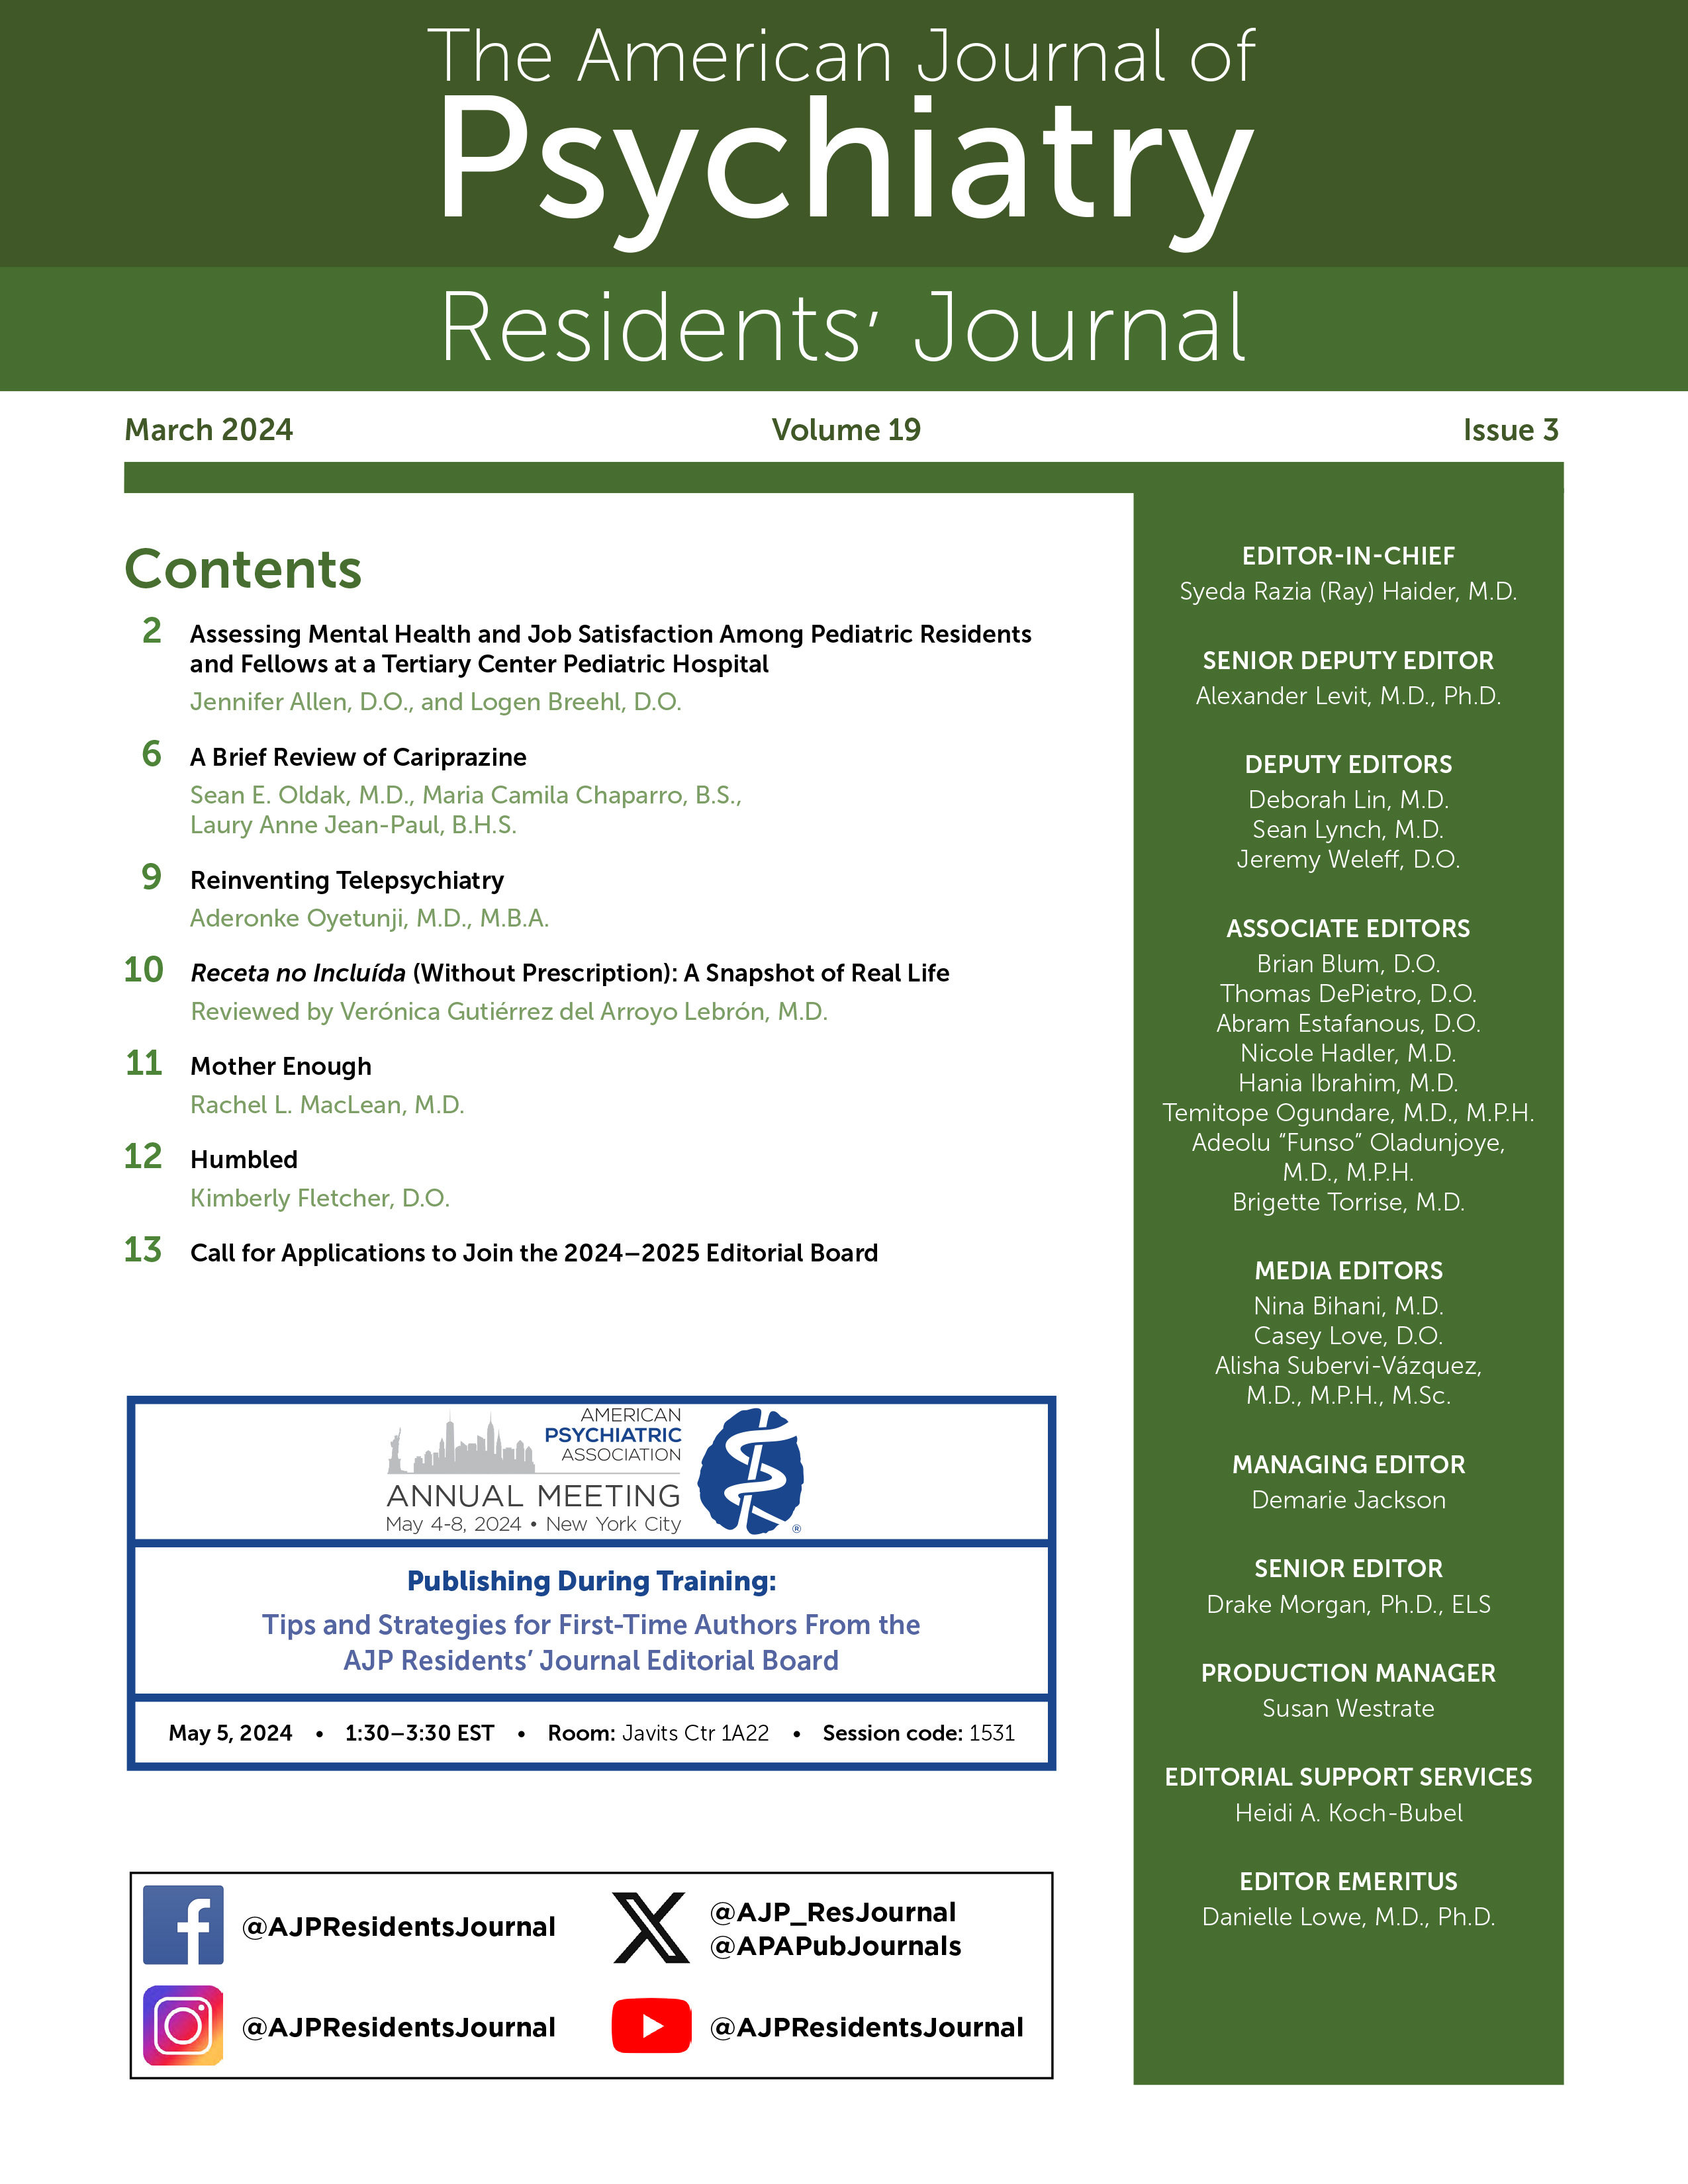 American Journal of Psychiatry Residents' Journal cover